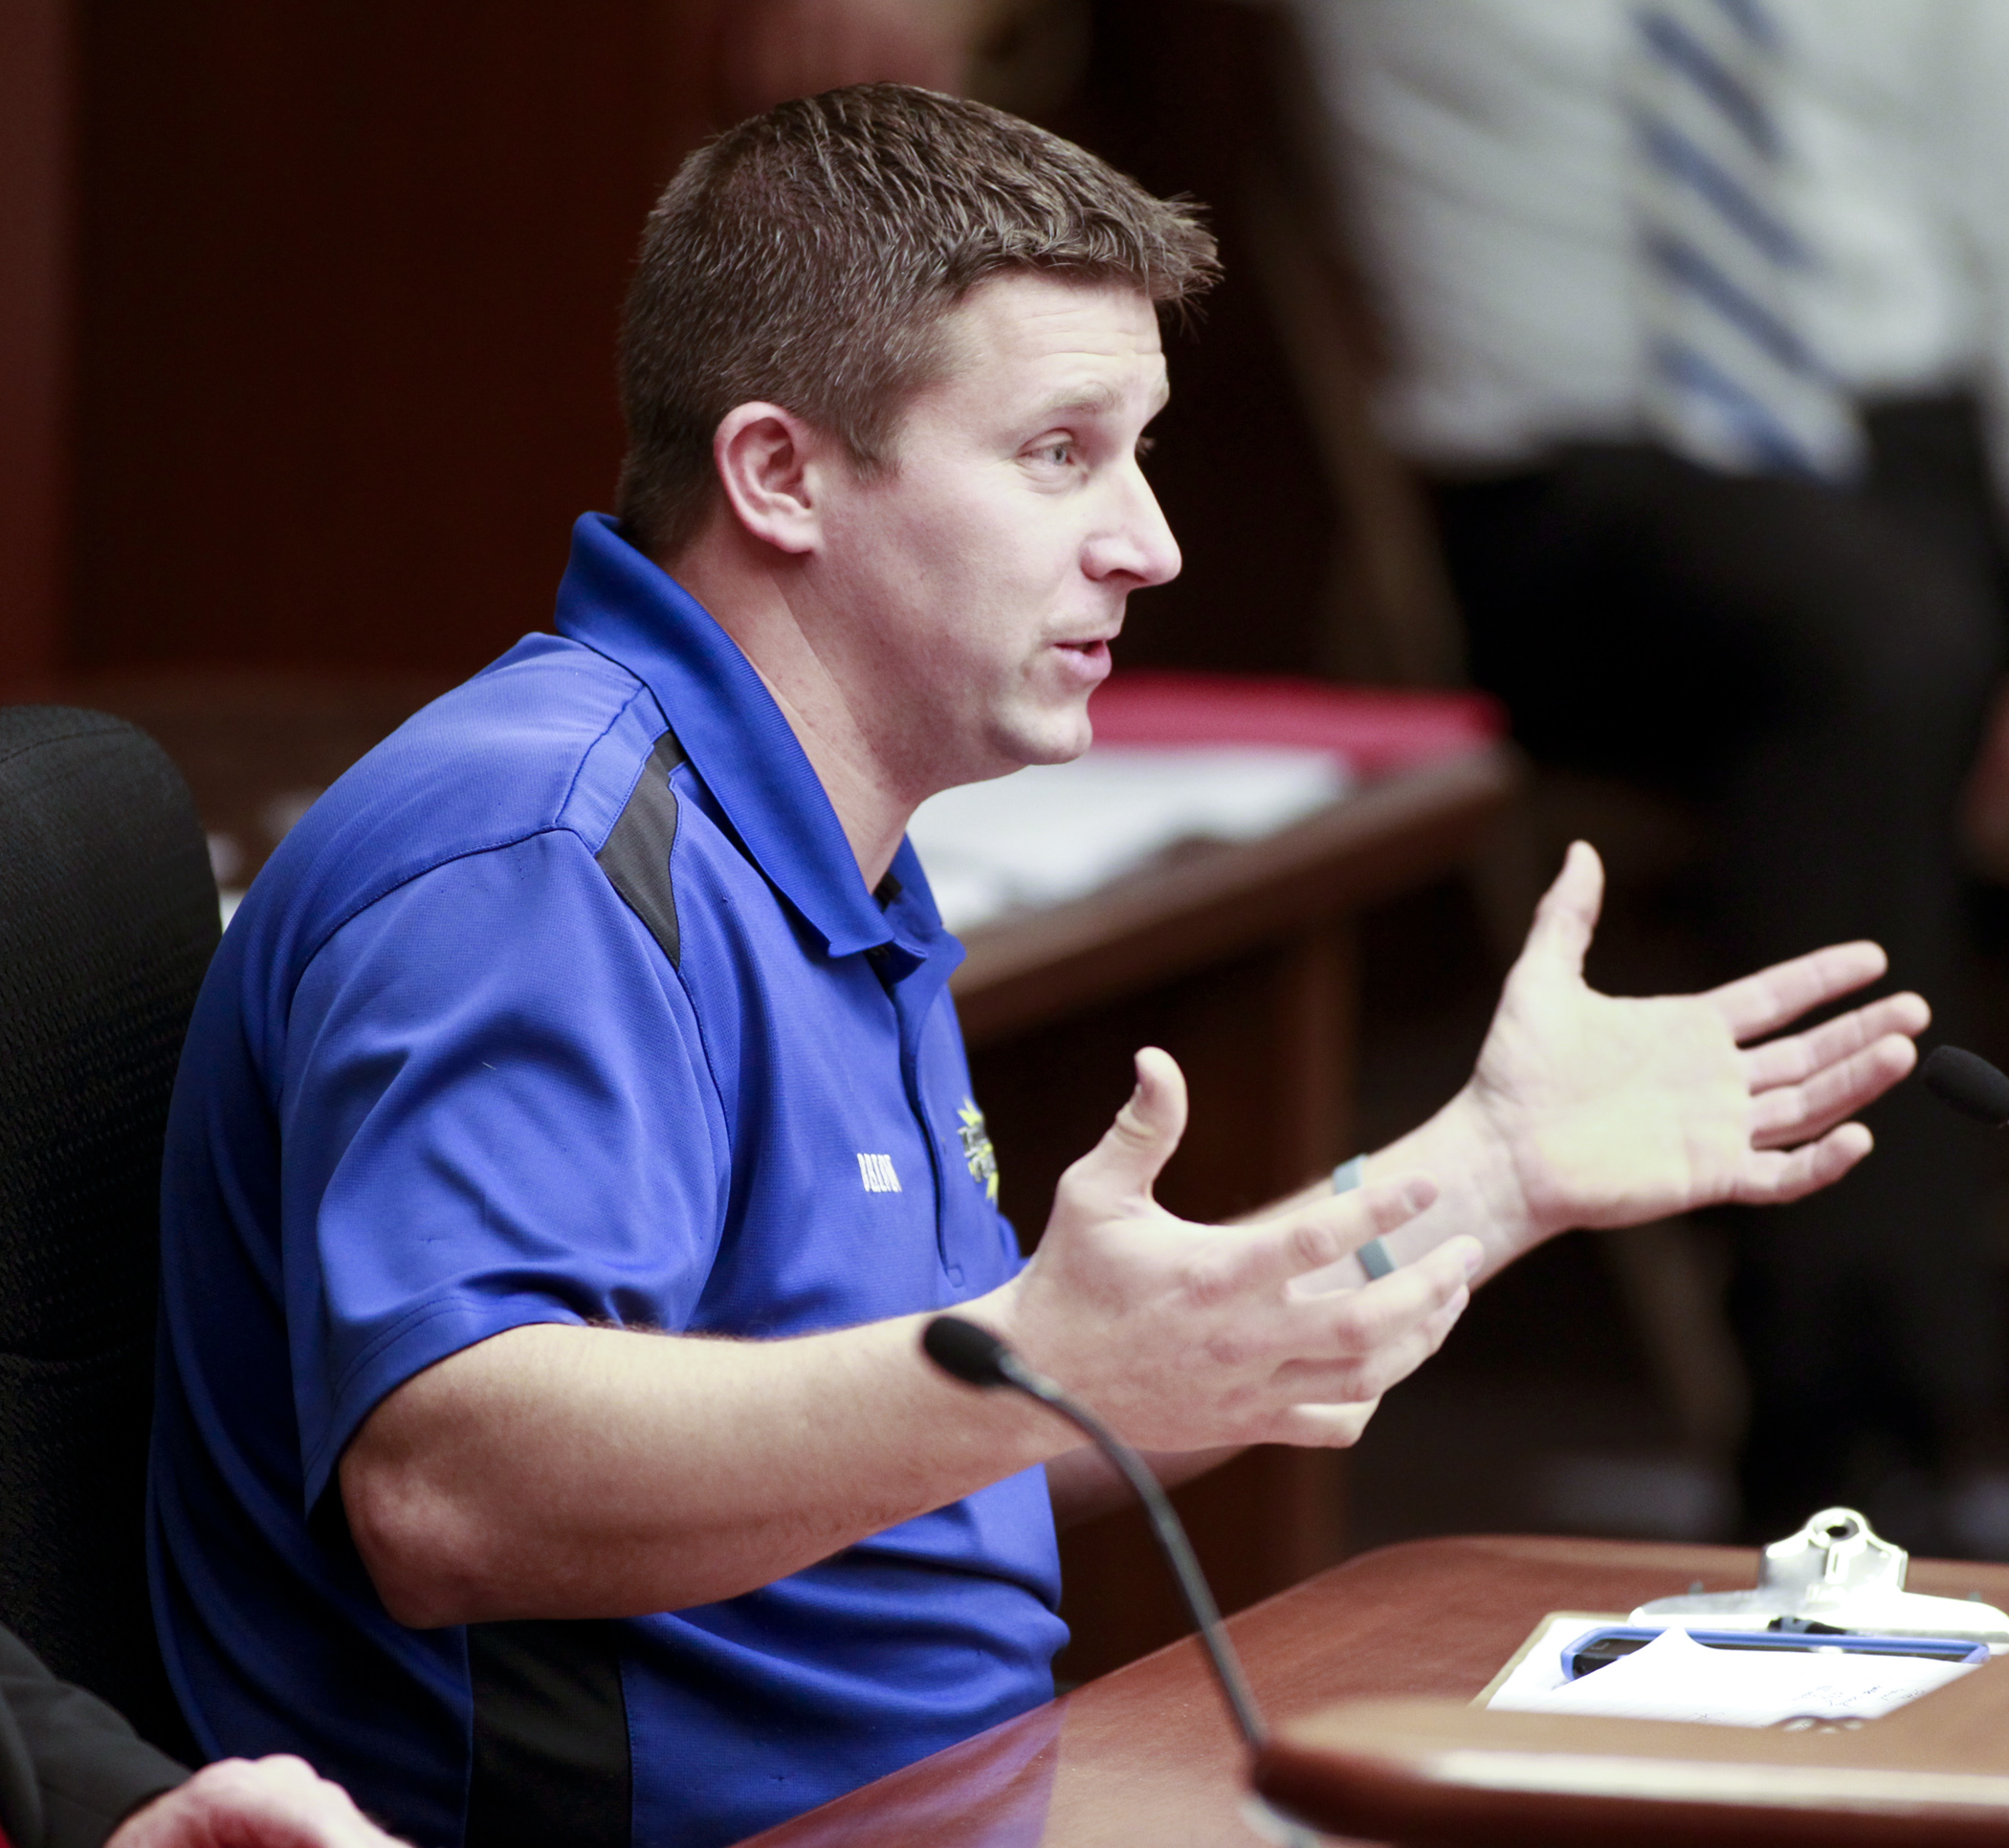 Brian Gilbertson of Lino Lakes, and owner of MagicBounce, Inc., relates his experience dealing with sales and use tax issues to the House Taxes Committee Jan. 21. Photo by Paul Battaglia